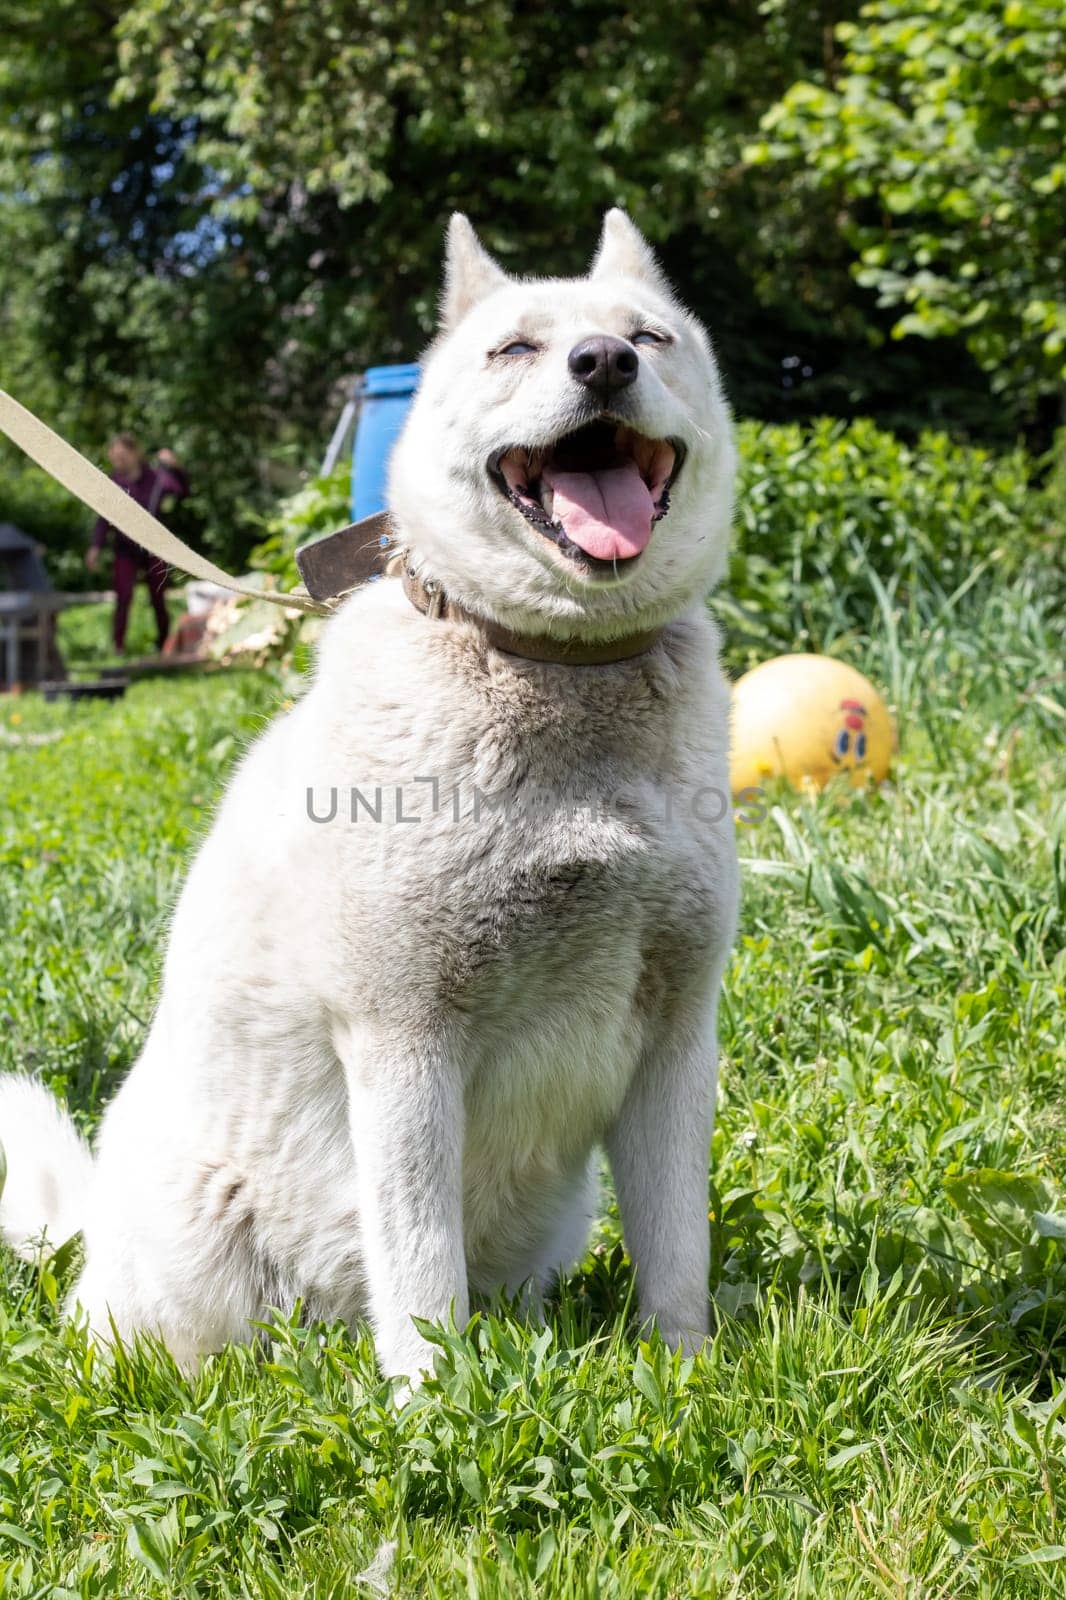 A white husky dog with blue eyes sits on the grass